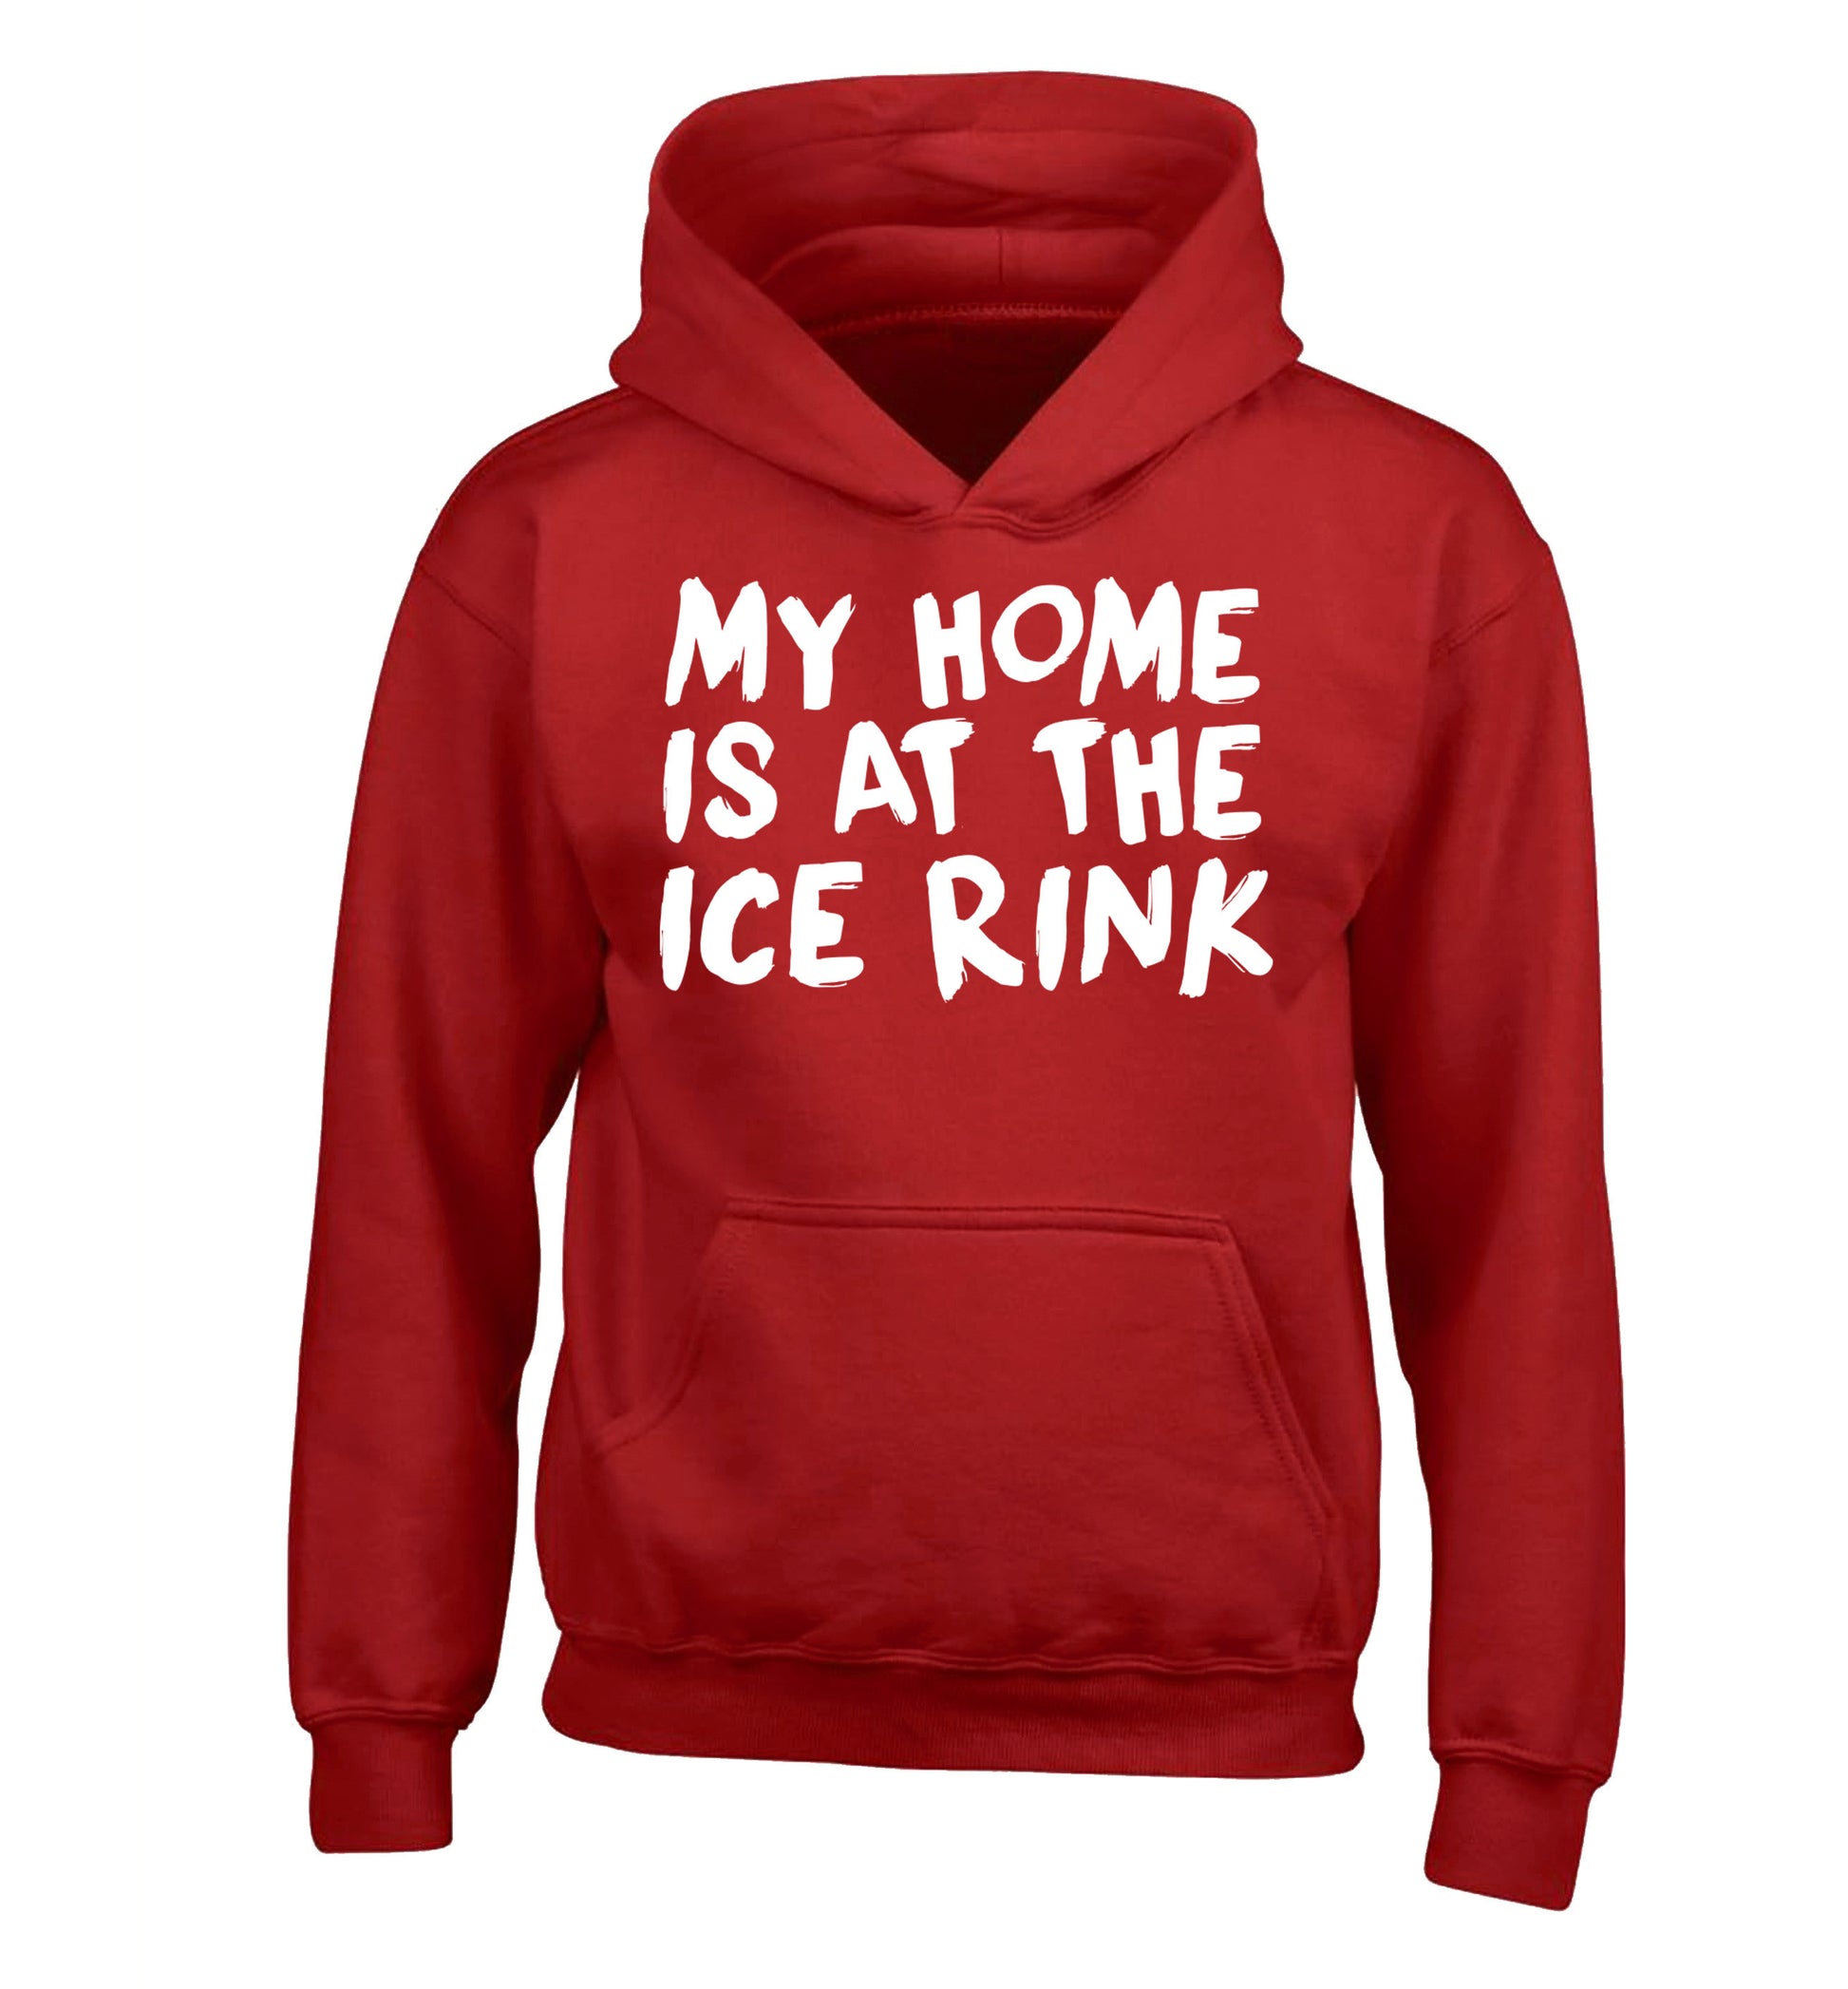 My home is at the ice rink children's red hoodie 12-14 Years